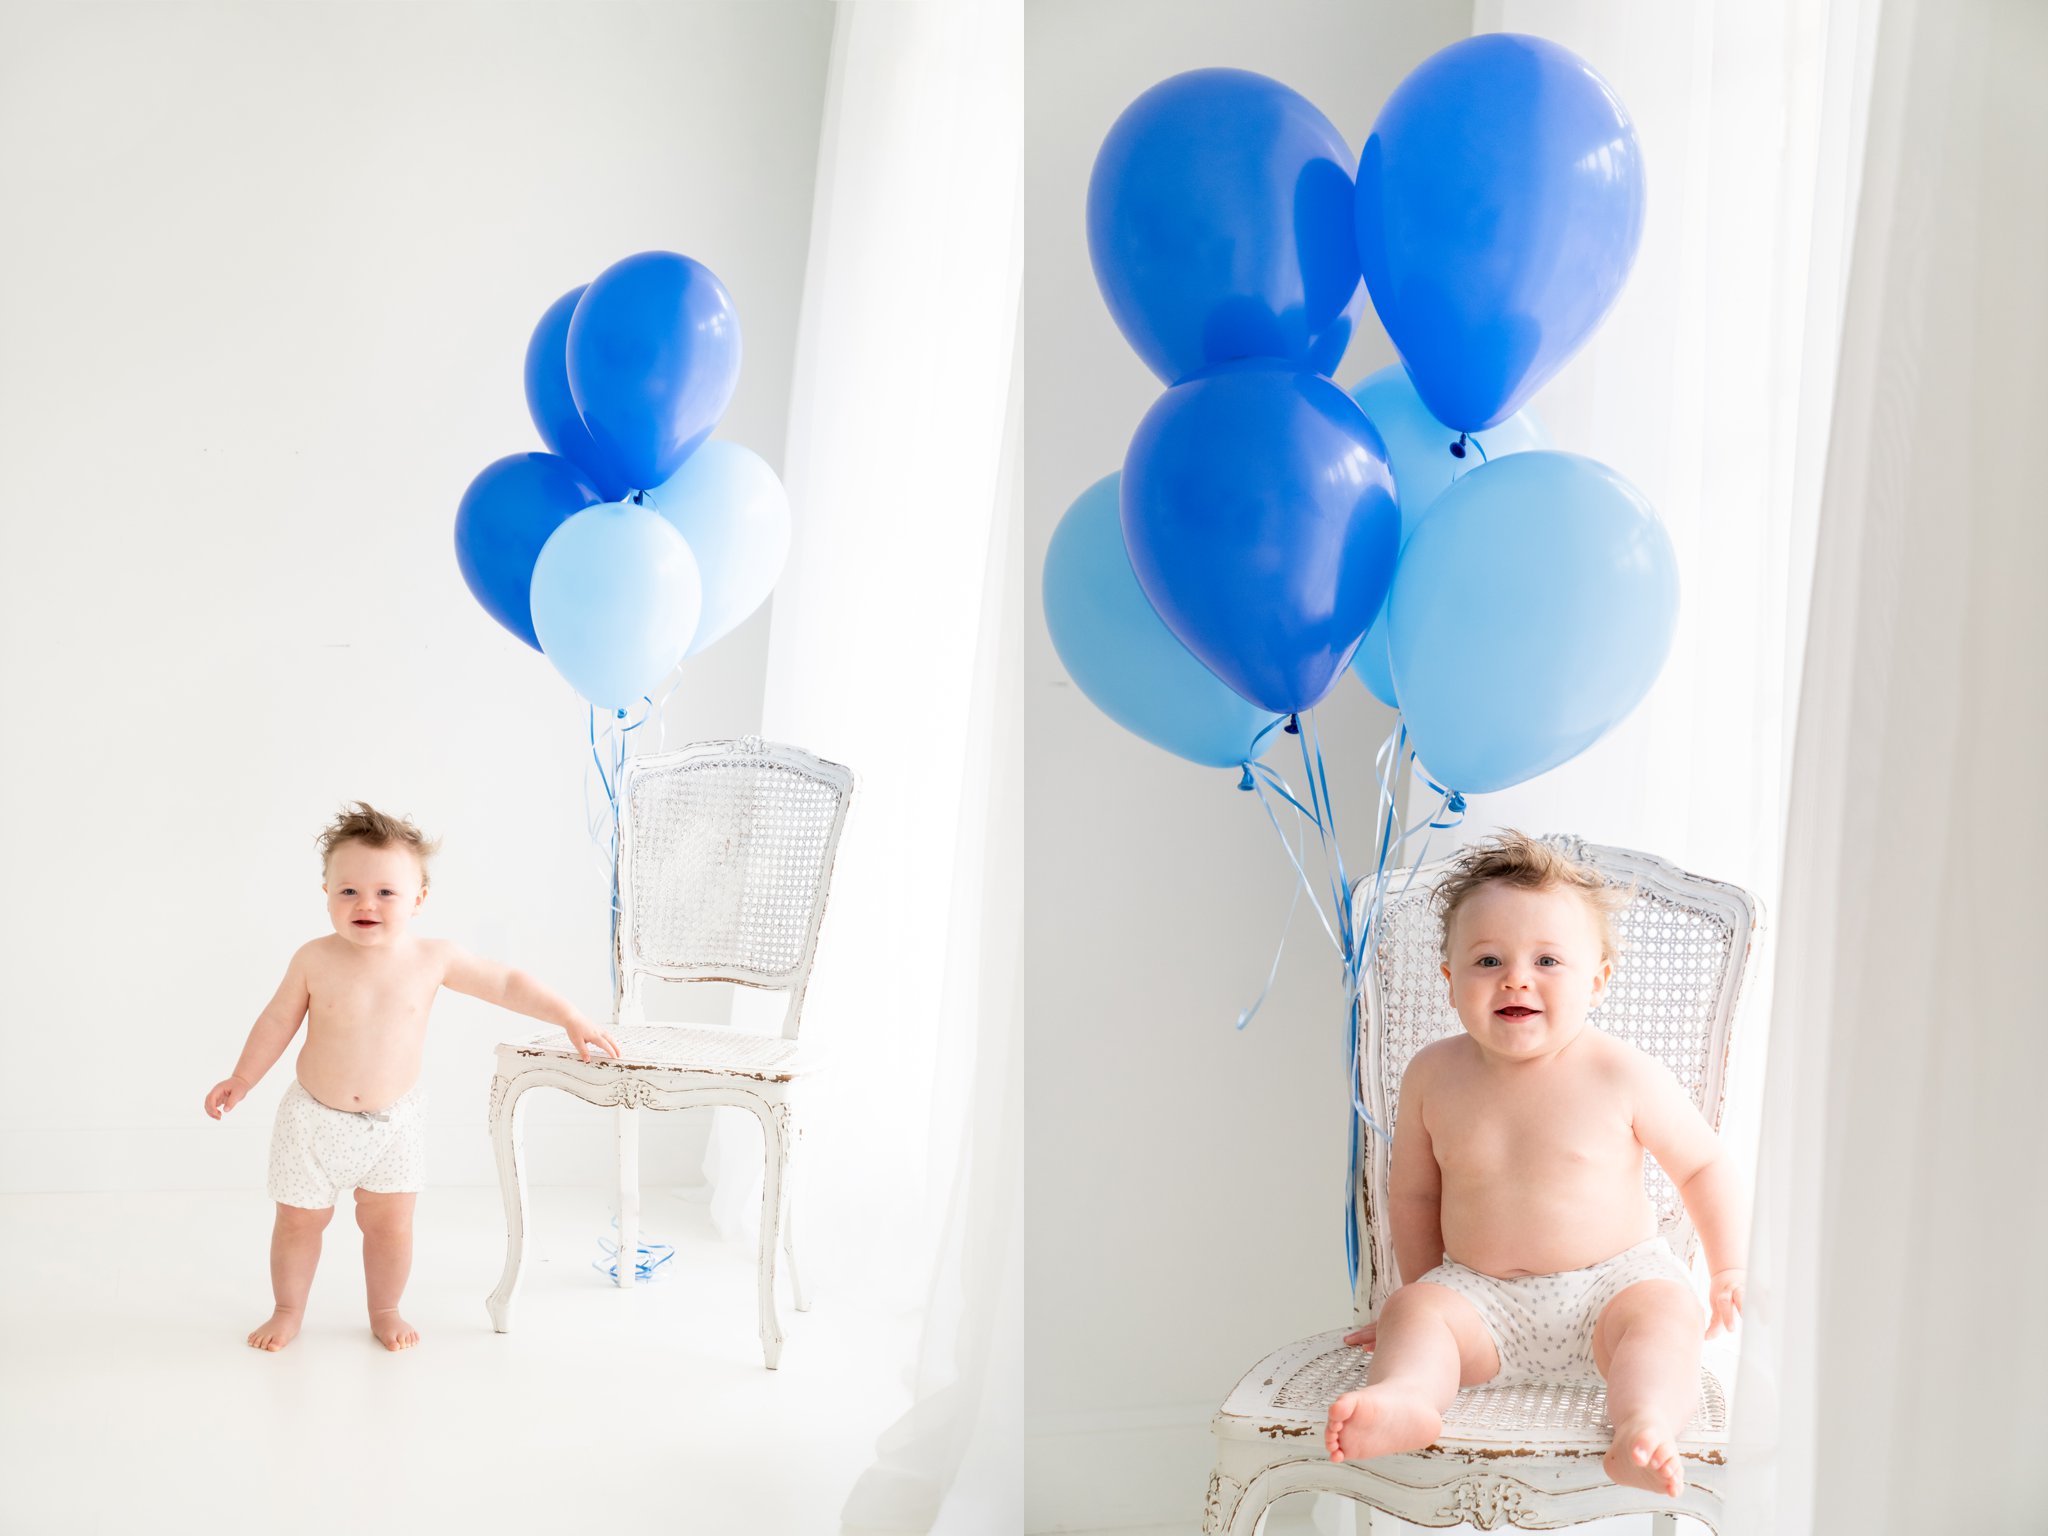 Birthday baby with blue balloons being photographed by bright window in a white chair.